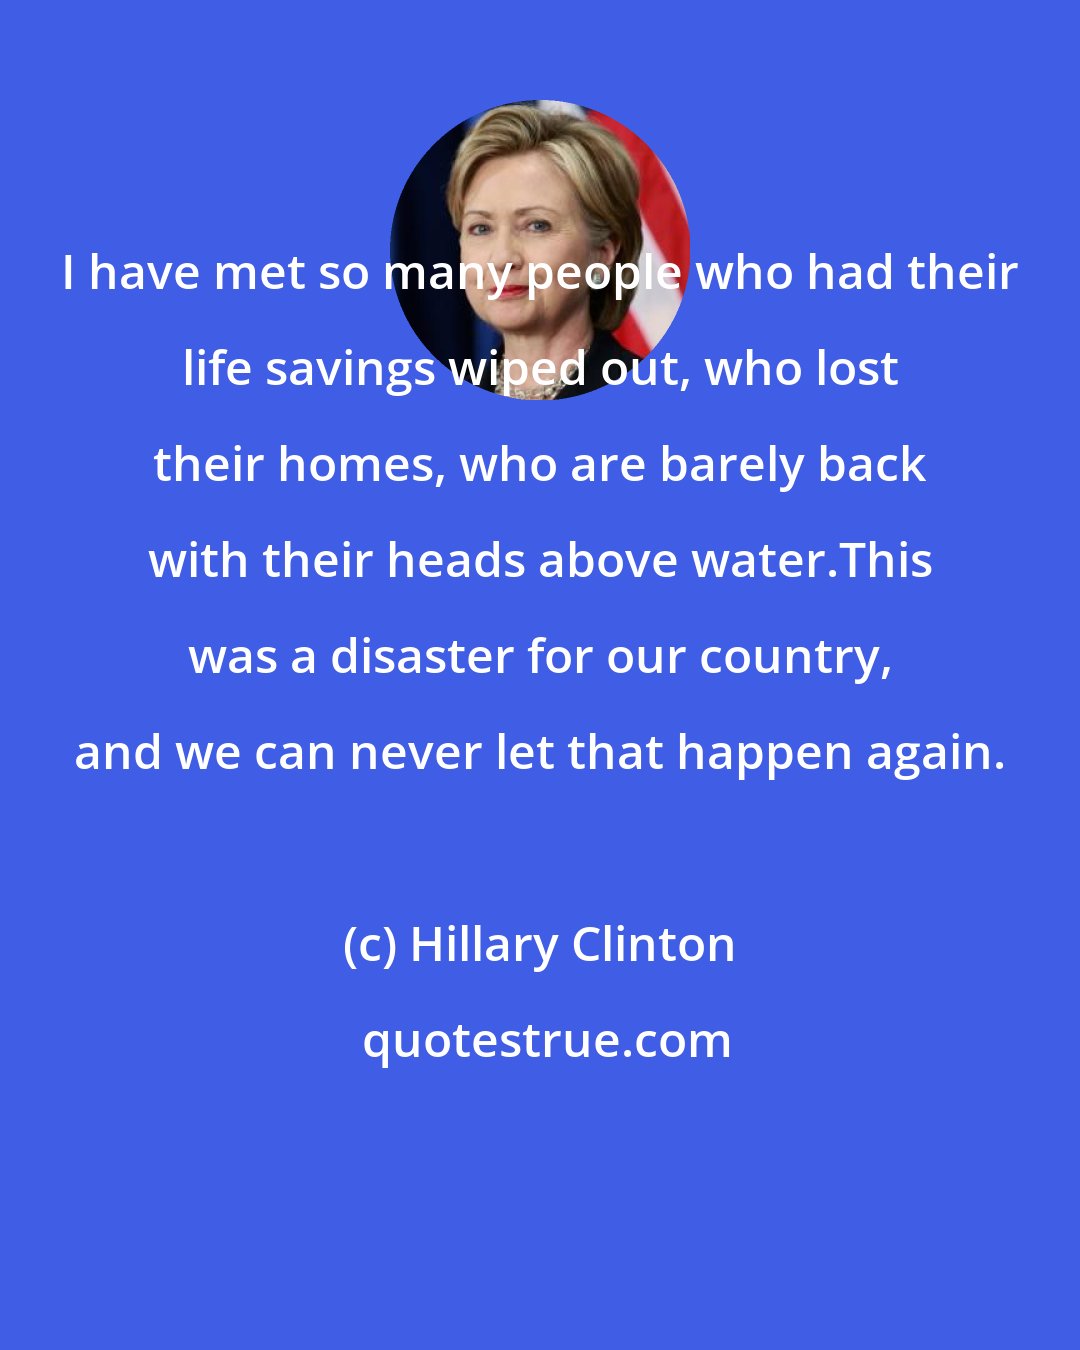 Hillary Clinton: I have met so many people who had their life savings wiped out, who lost their homes, who are barely back with their heads above water.This was a disaster for our country, and we can never let that happen again.